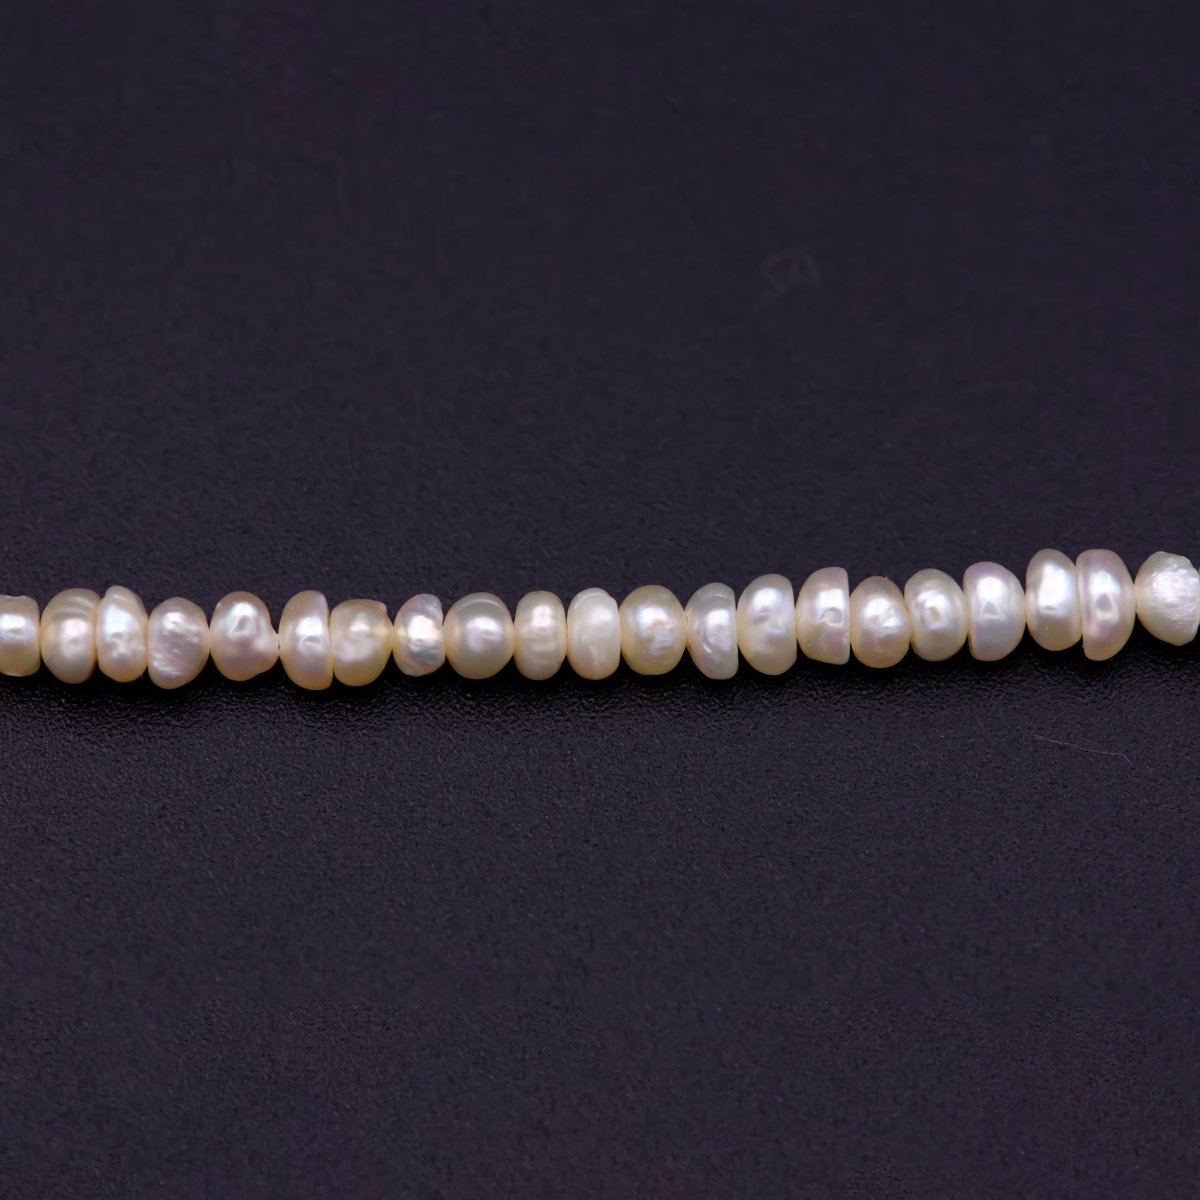 2.9mm-3.8mm white potato freshwater pearls, seed pearl, small size pearl, genuine pearl bead strand supply for Jewelry Making | WA-570 Clearance Pricing - DLUXCA